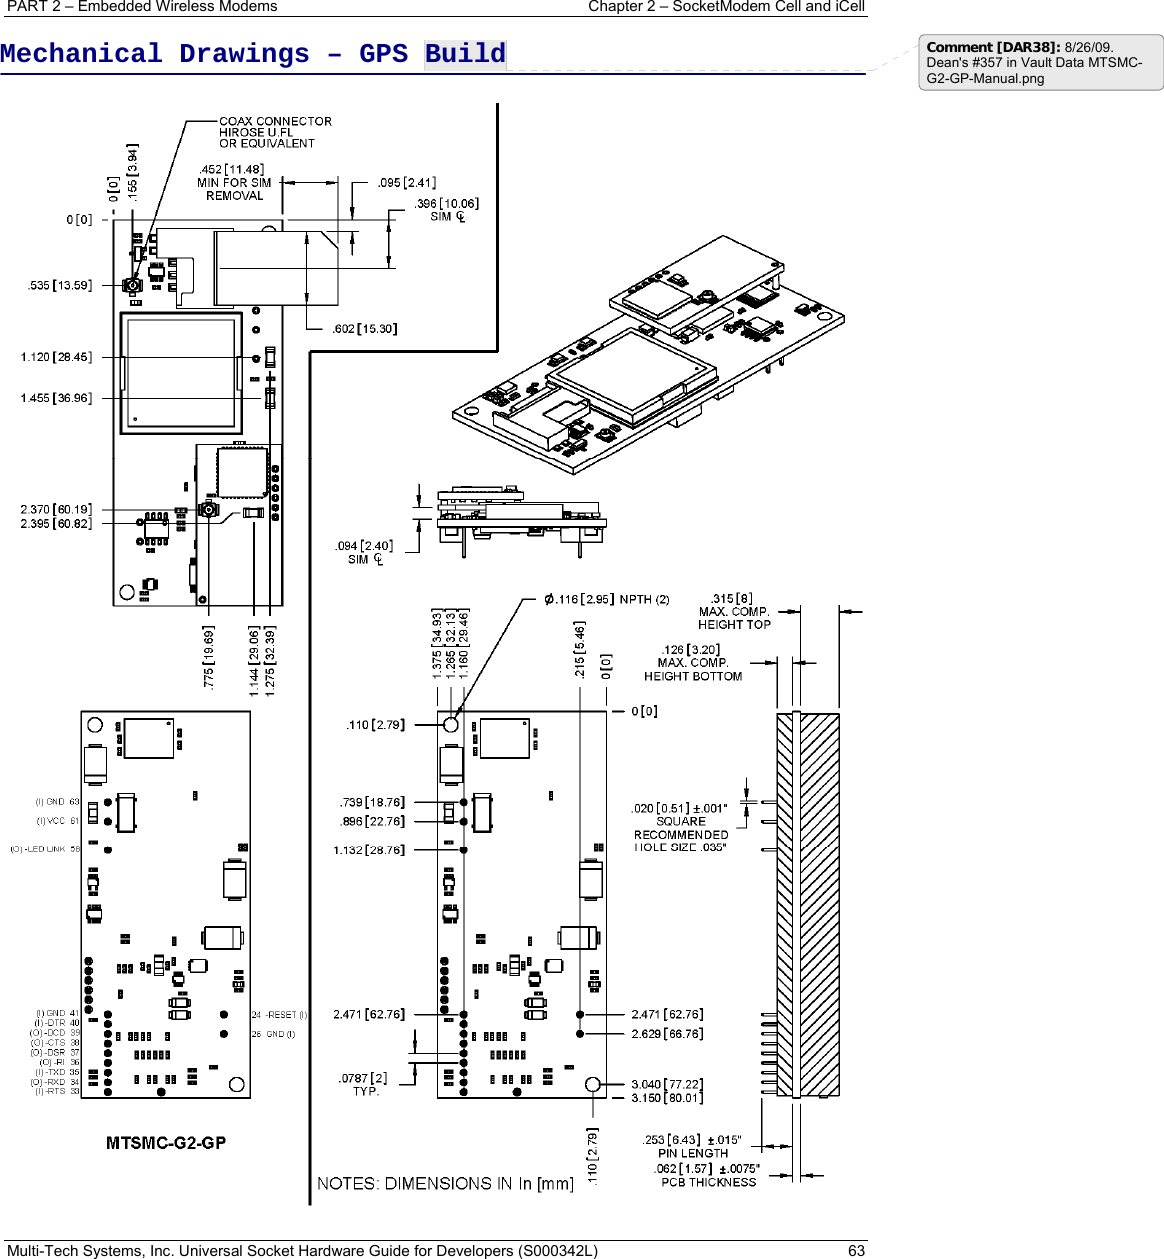 PART 2 – Embedded Wireless Modems   Chapter 2 – SocketModem Cell and iCell Multi-Tech Systems, Inc. Universal Socket Hardware Guide for Developers (S000342L)  63  Mechanical Drawings – GPS Build  Comment [DAR38]: 8/26/09. Dean&apos;s #357 in Vault Data MTSMC-G2-GP-Manual.png 